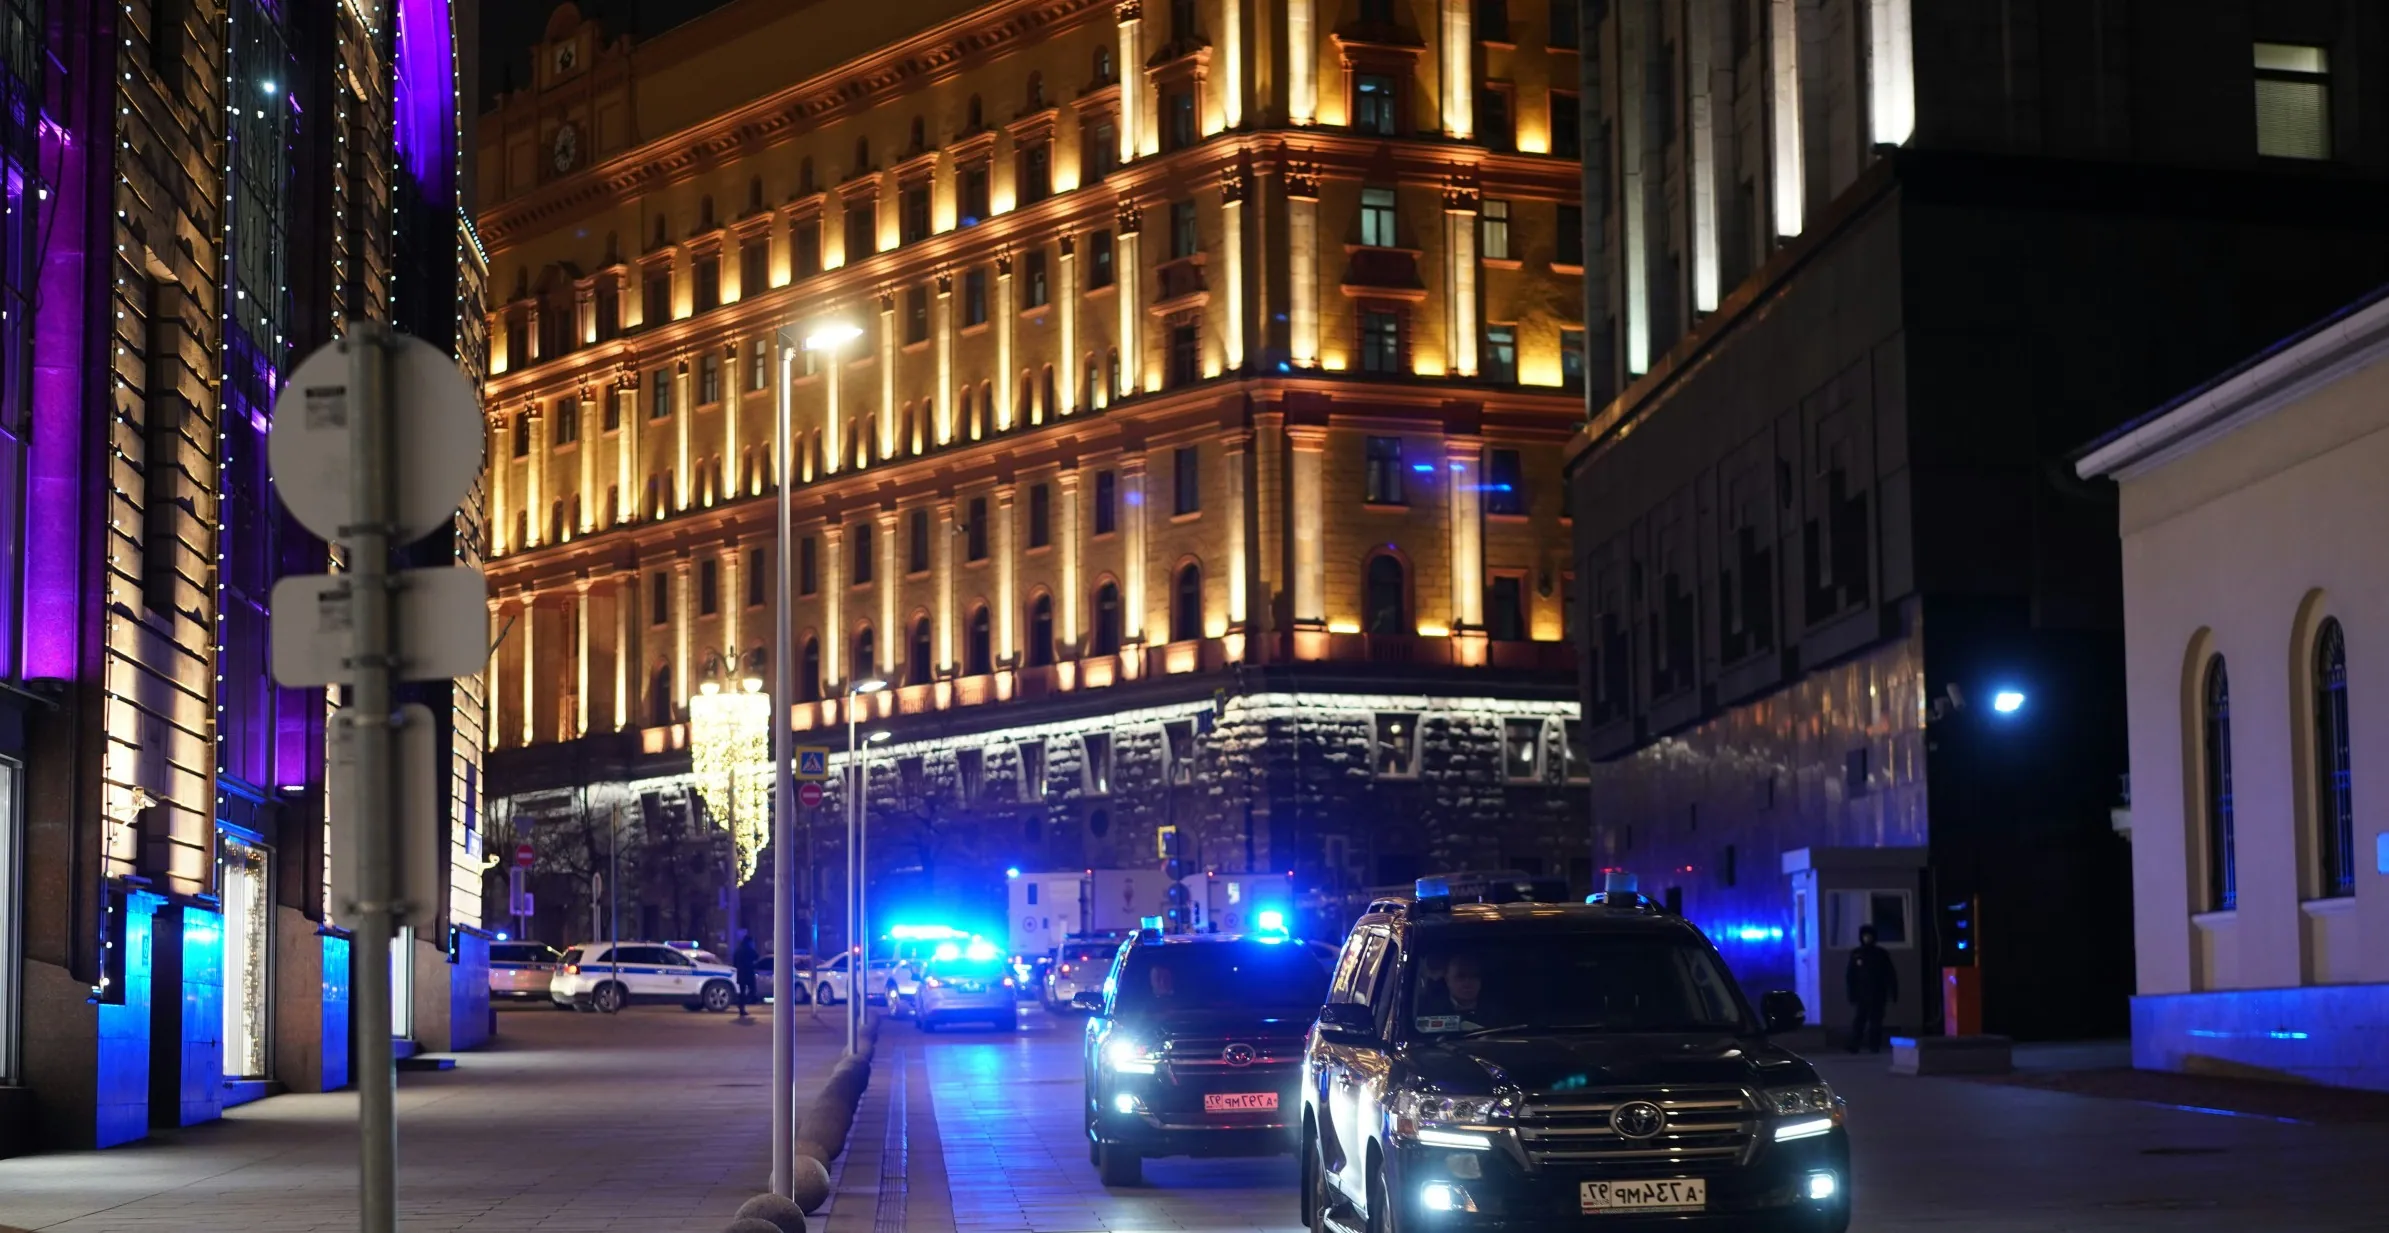 60 Killed, 150 Injured in Moscow Concert Mass Shooting | Live Coverage